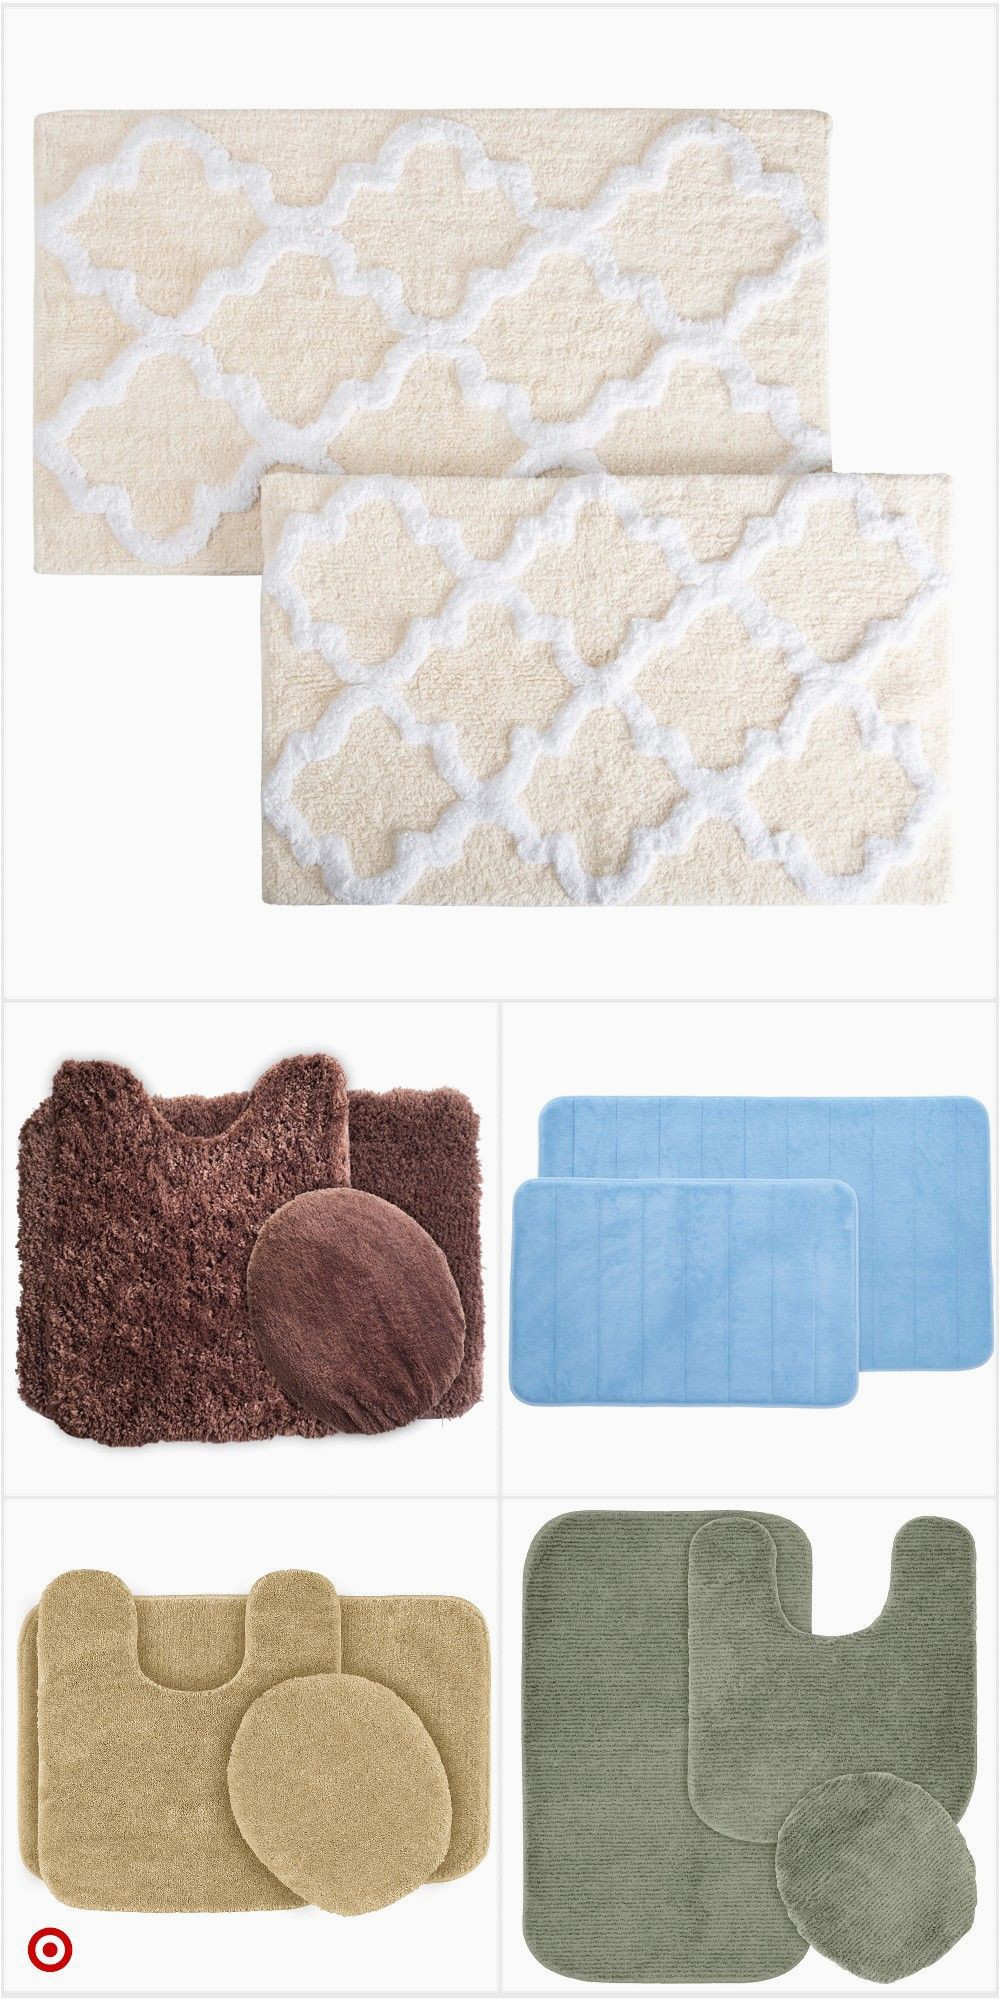 Target Bathroom Rug Sets Shop Tar for Bath Mat Set You Will Love at Great Low